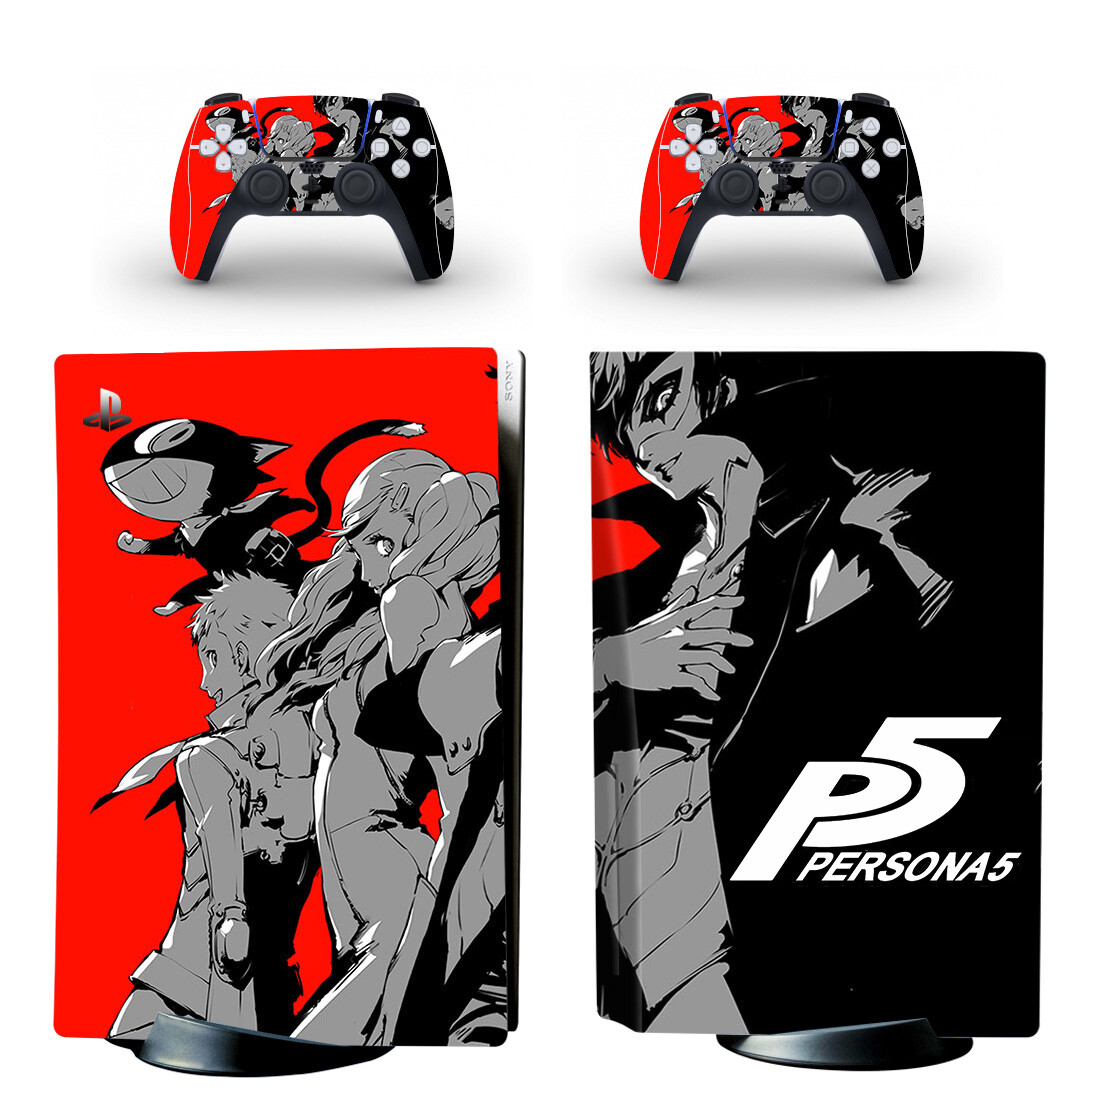 Persona 5 Skin Sticker For PS5 Skin And Controllers